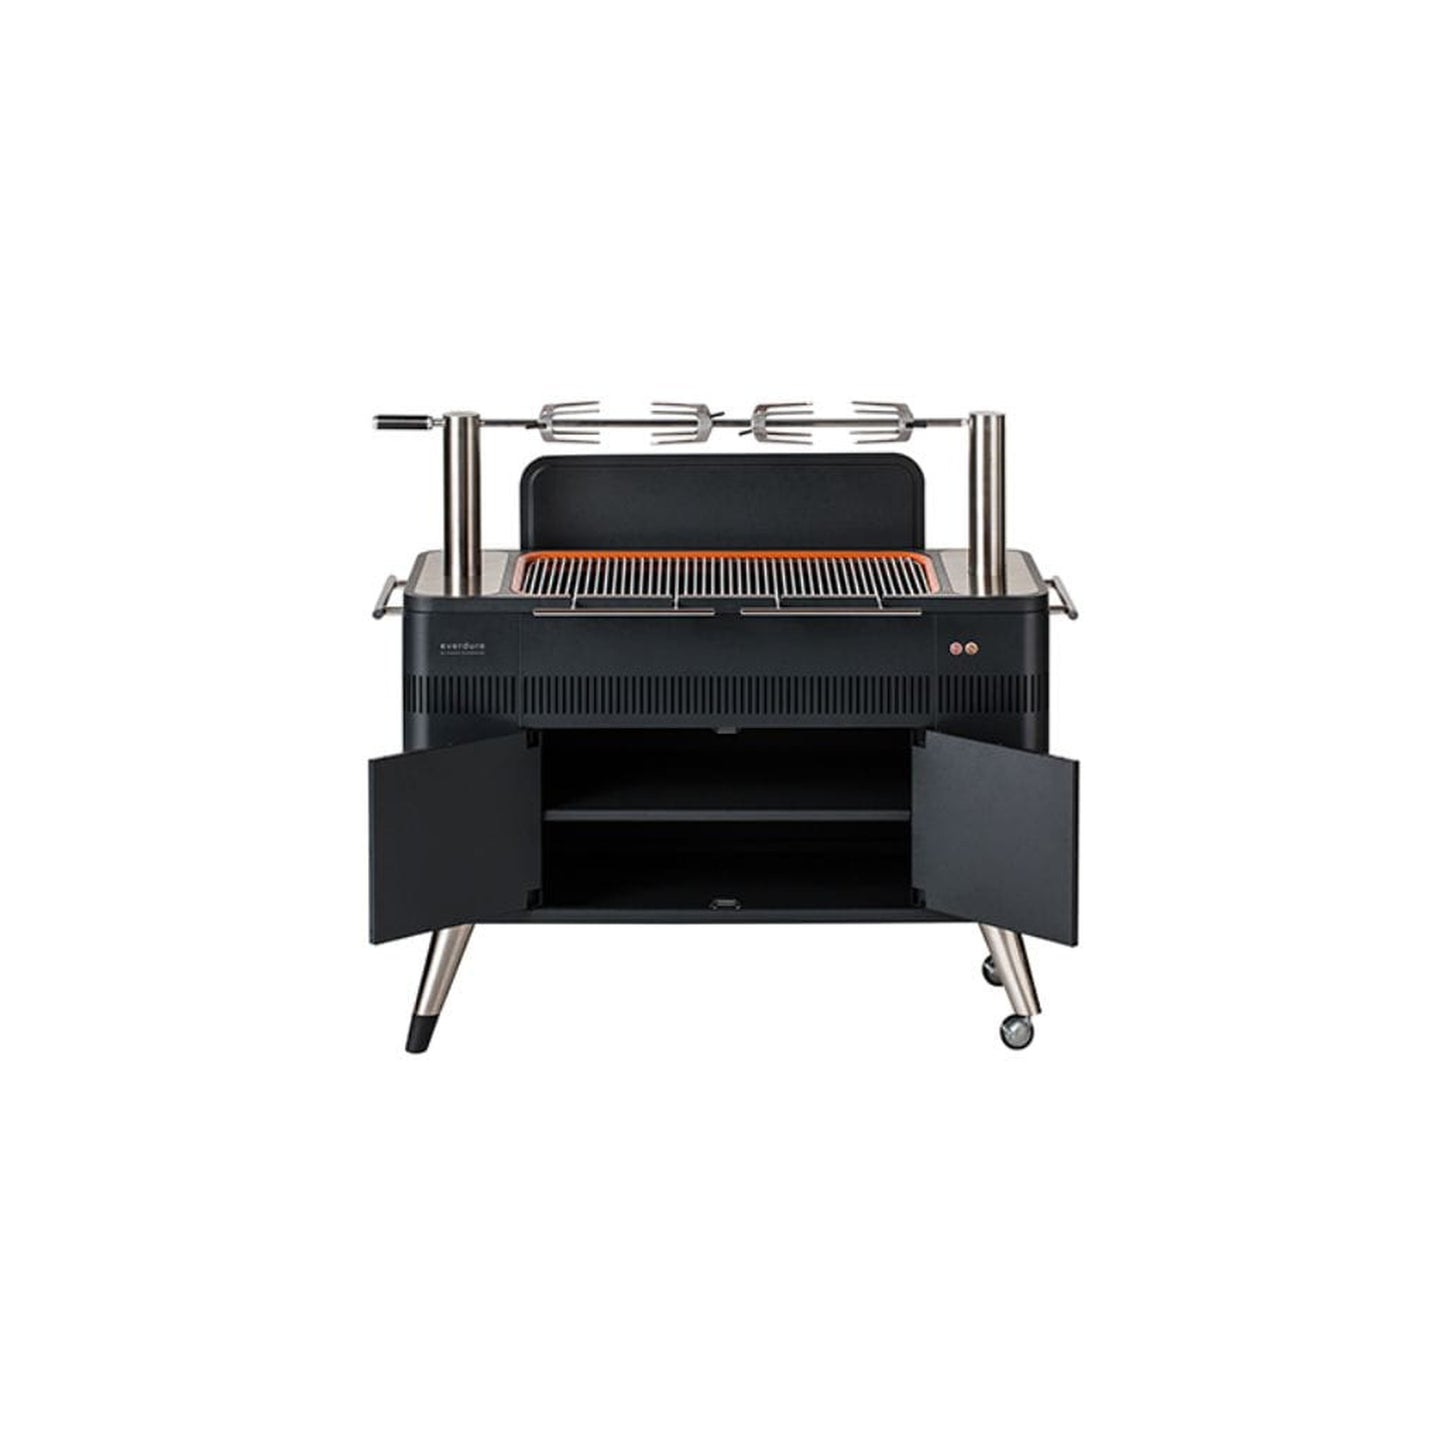 Everdure 54" HUB Grill, Charcoal BBQ with Electric Element & Rotisserie